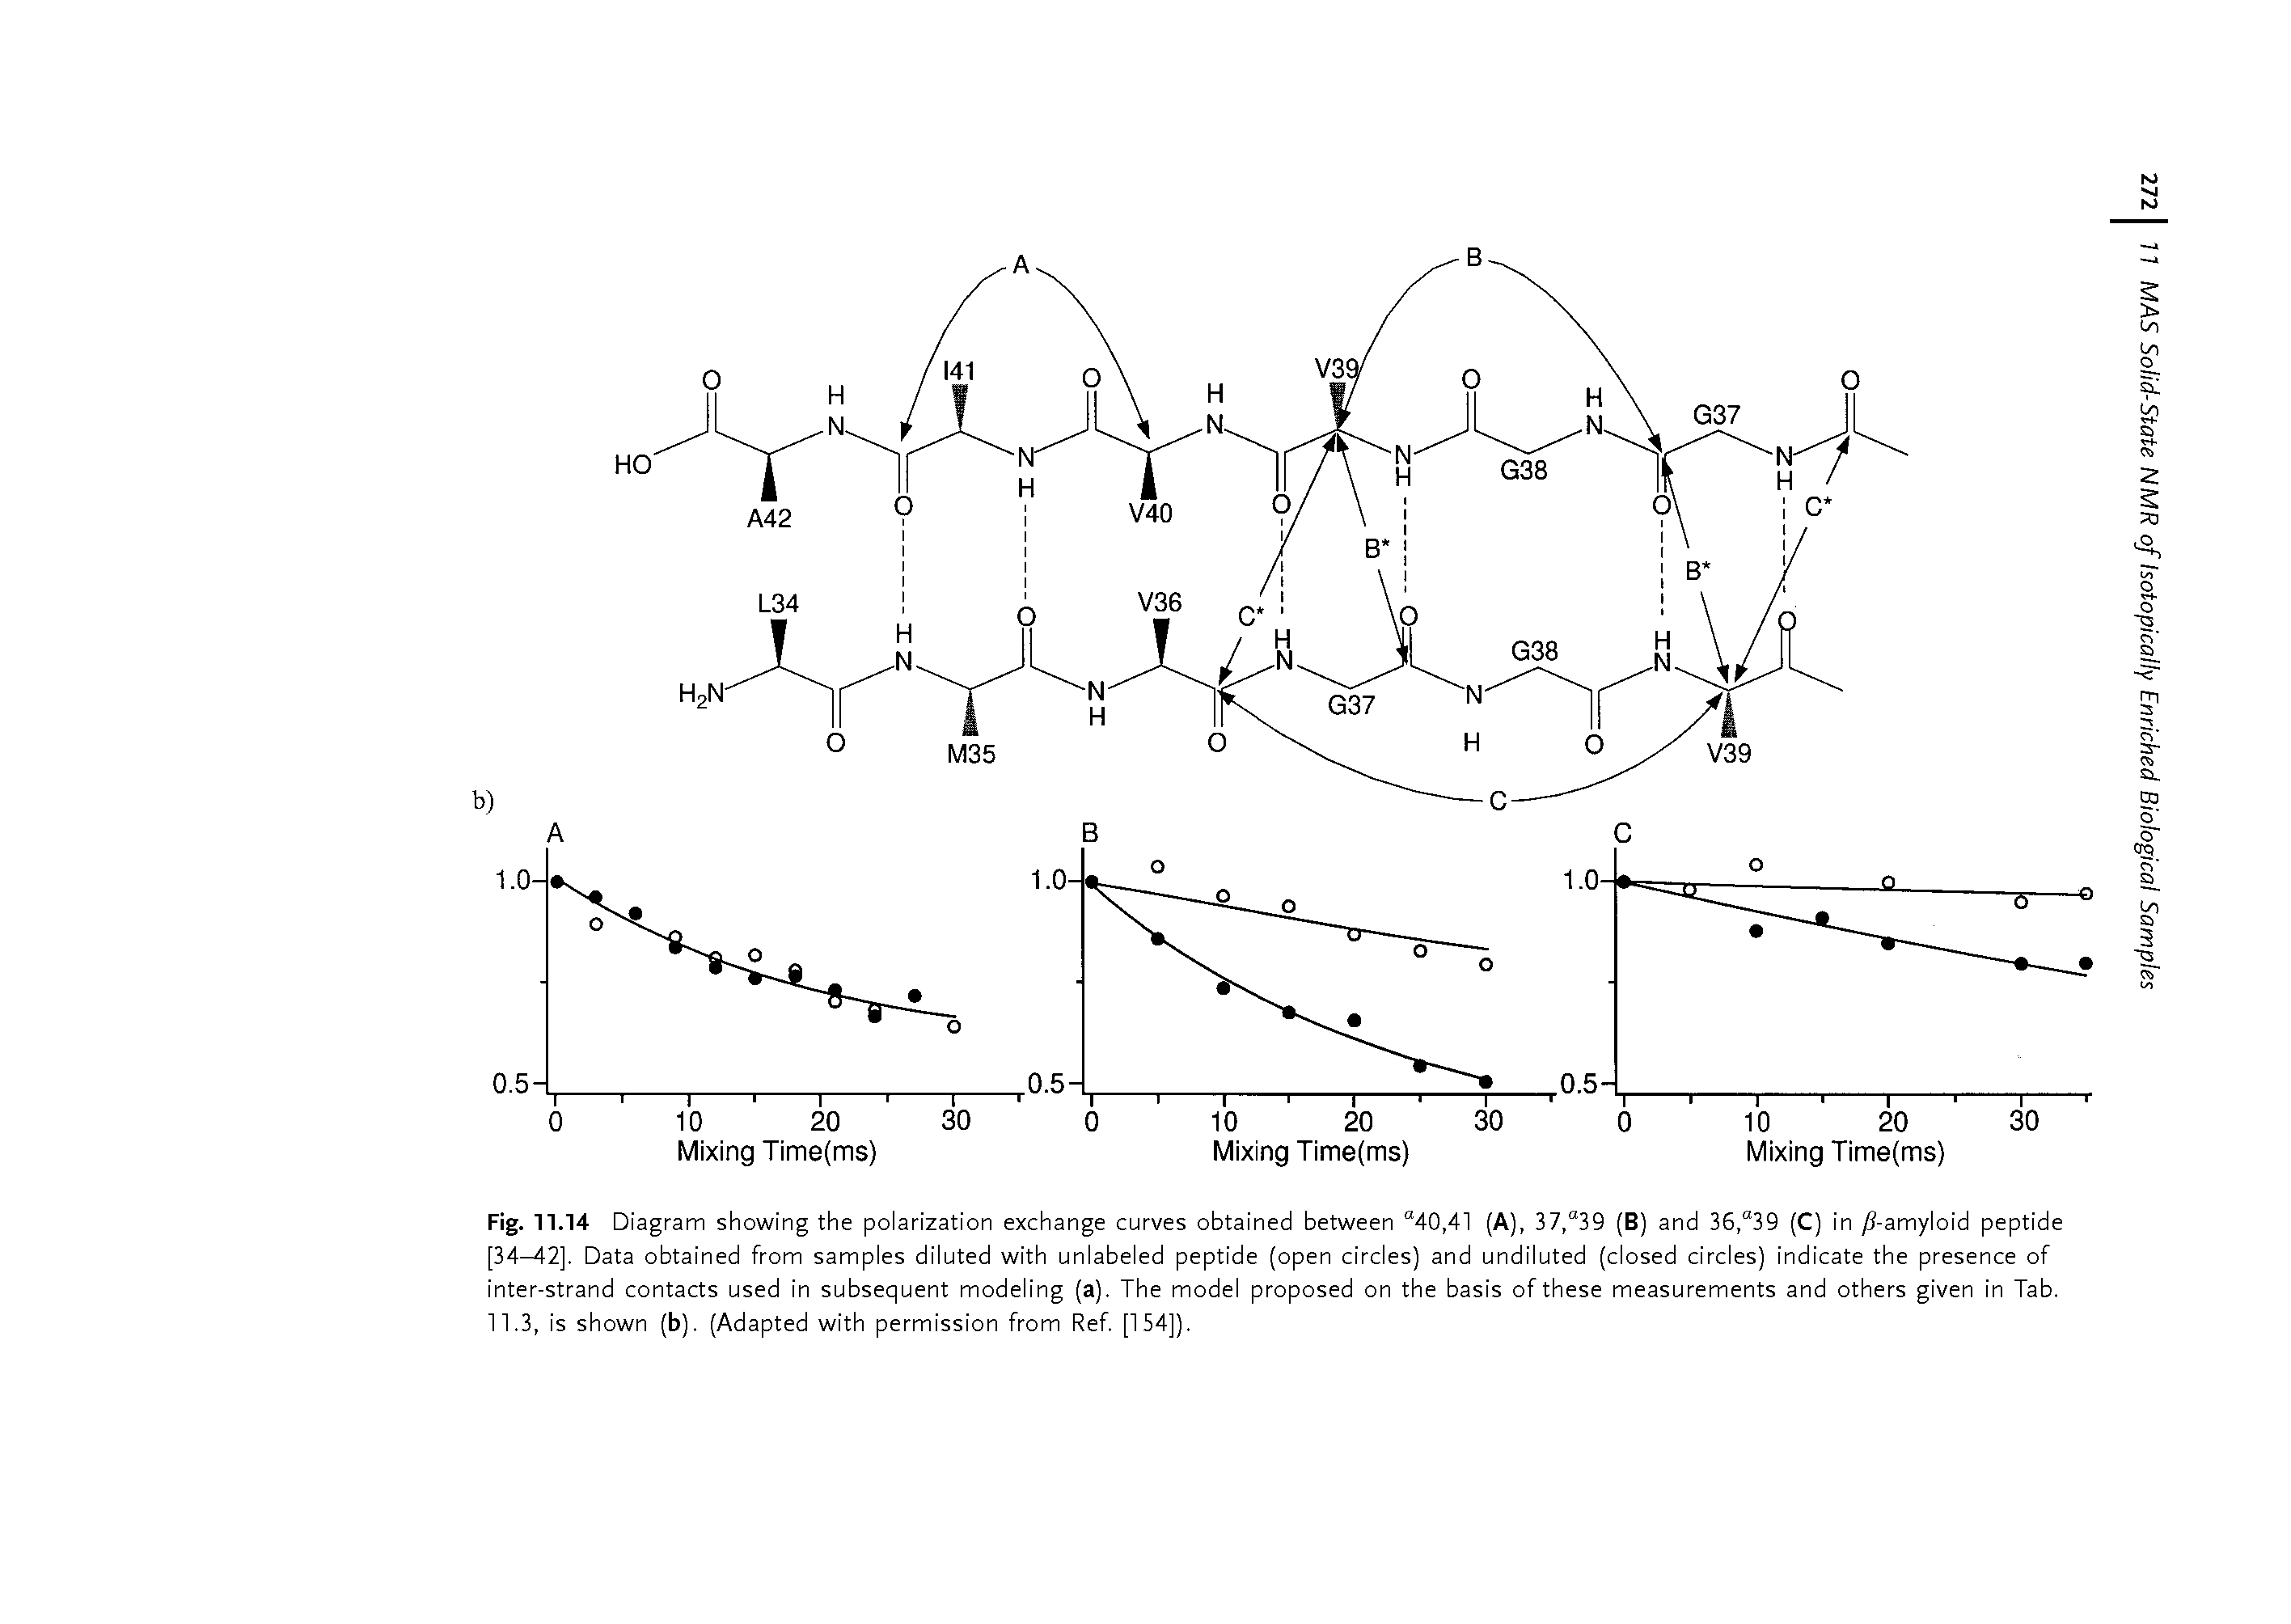 Fig. 11.14 Diagram showing the polarization exchange curves obtained between 40,41 (A), 37, 39 (B) and 36, 39 (C) in /7-amyloid peptide [34-42]. Data obtained from samples diluted with unlabeled peptide (open circles) and undiluted (closed circles) indicate the presence of inter-strand contacts used in subsequent modeling (a). The model proposed on the basis of these measurements and others given in Tab. 11.3, is shown (b). (Adapted with permission from Ref. [154]).